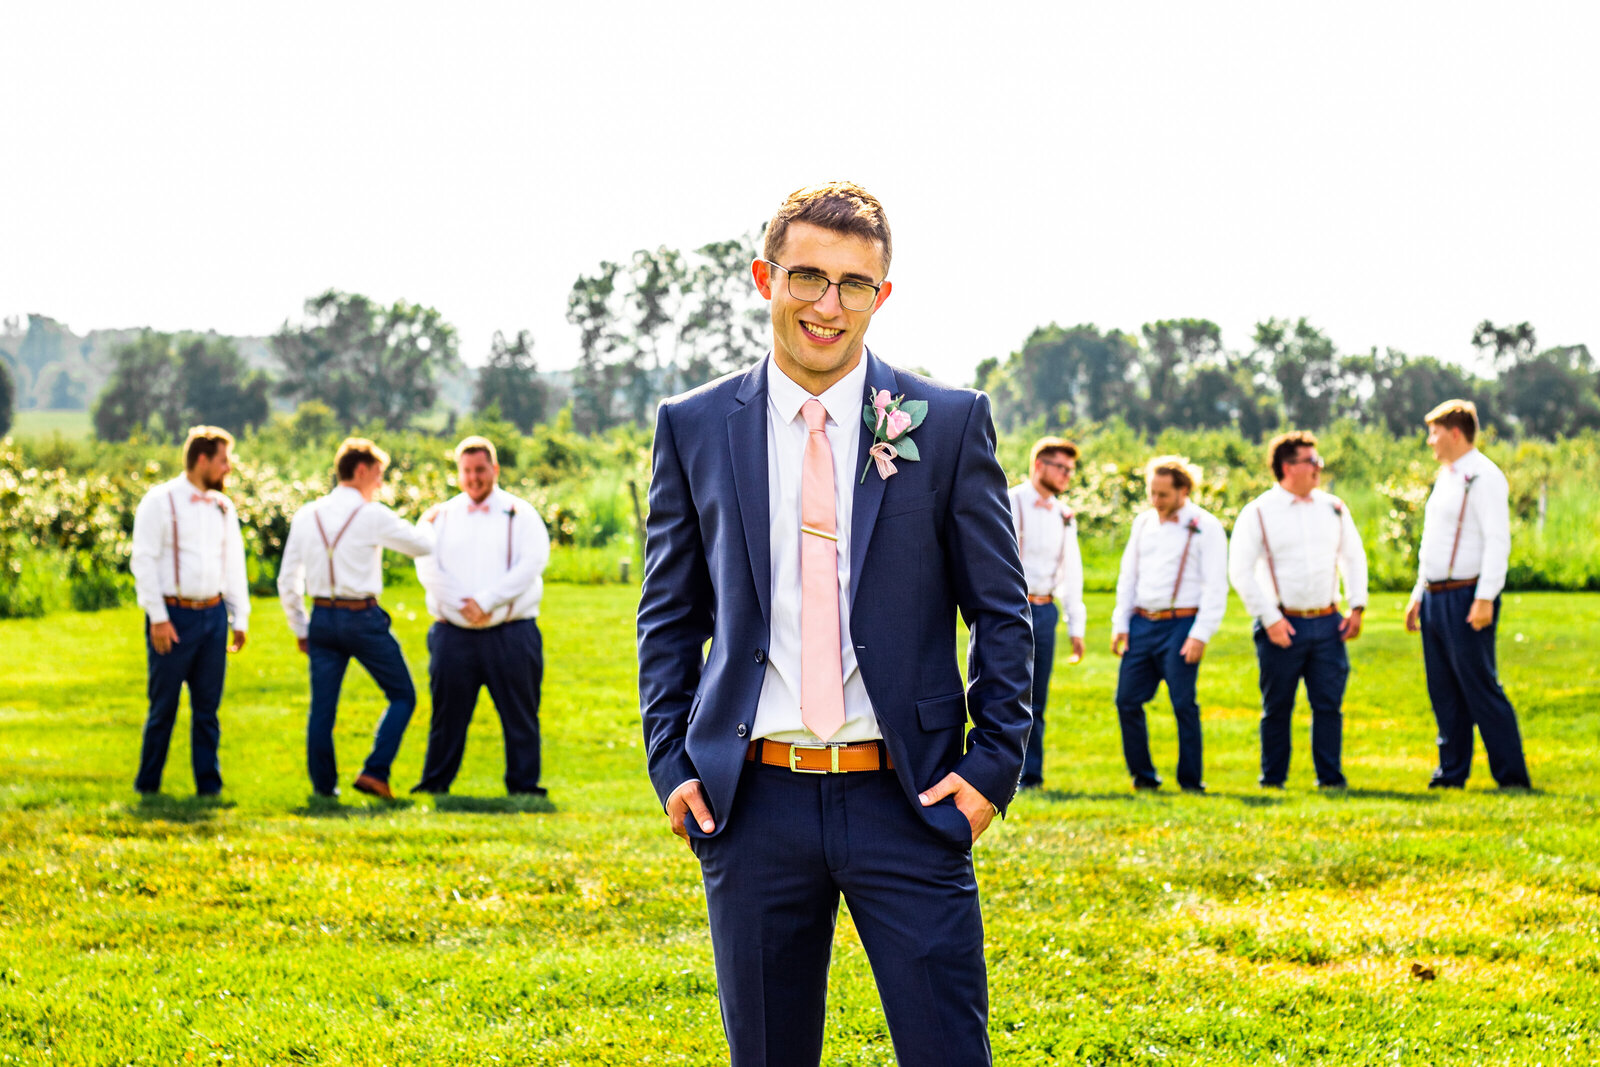 Groomsmen photos outside in a field at The Cherry Barc Farm. Photos by Devin Ramon Photography.